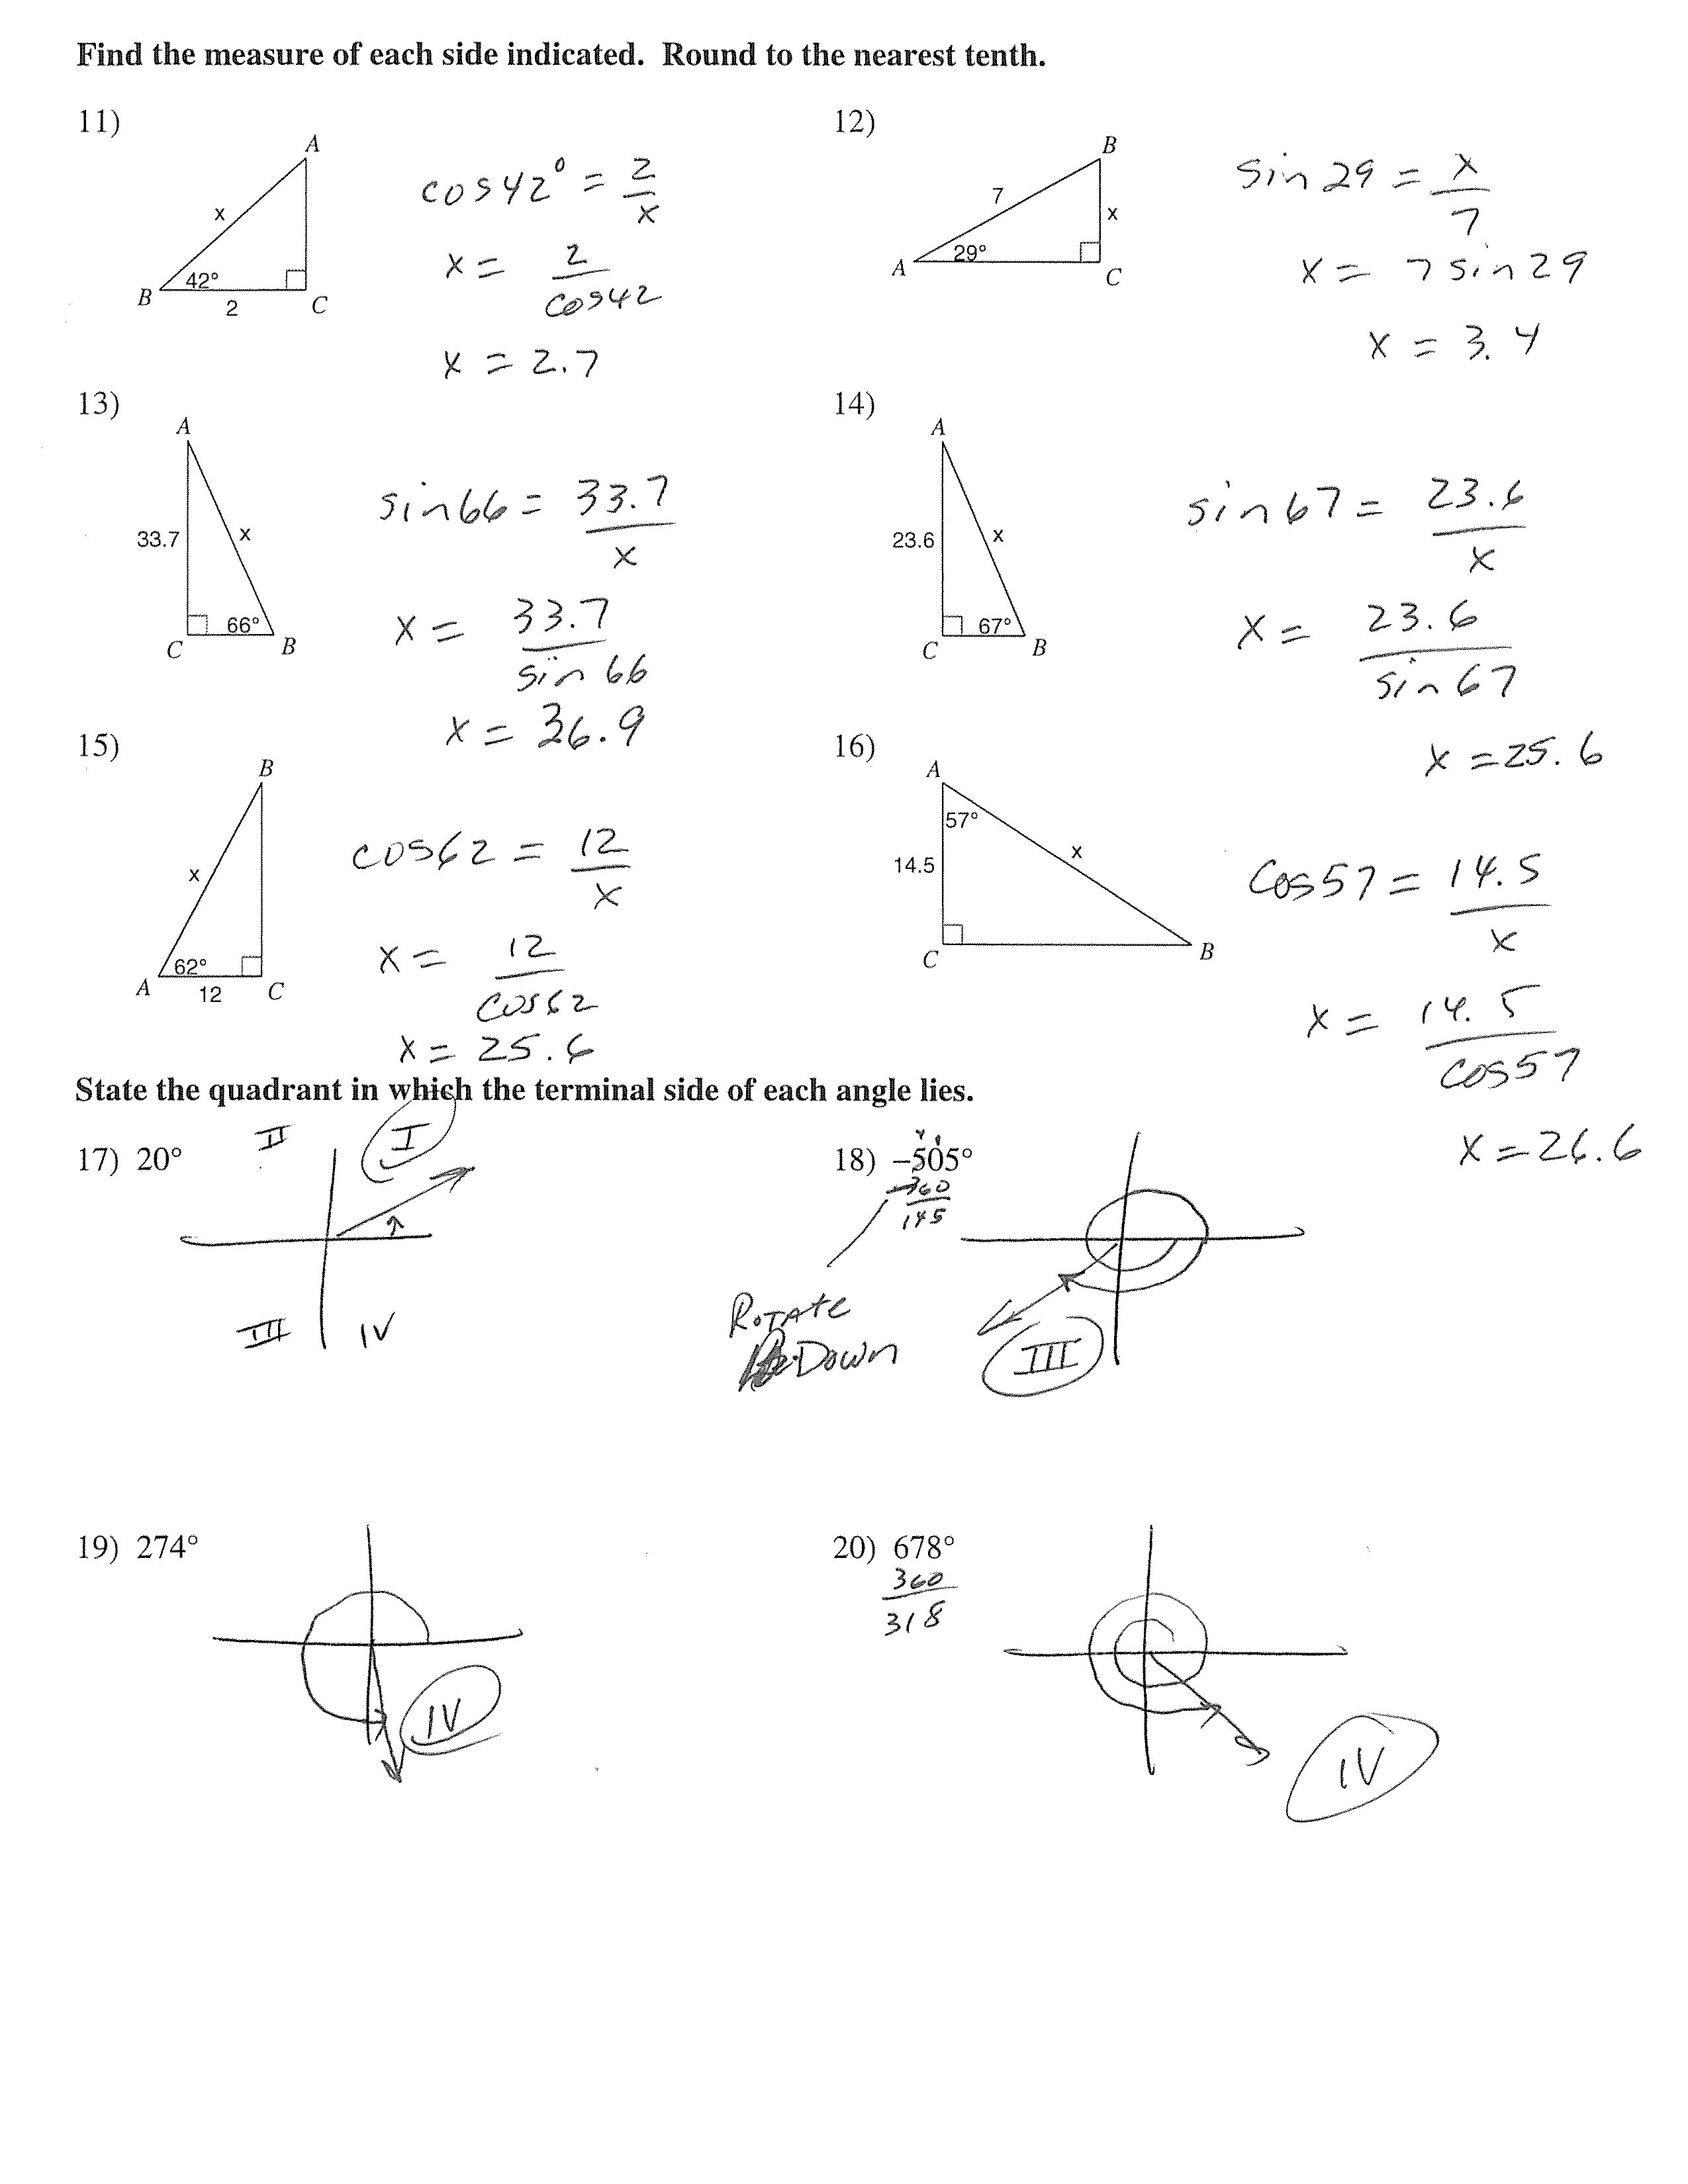 Law Of Sines Practice Worksheet The Best Worksheets Image Collection Or Law Of Sines Practice Worksheet Answers